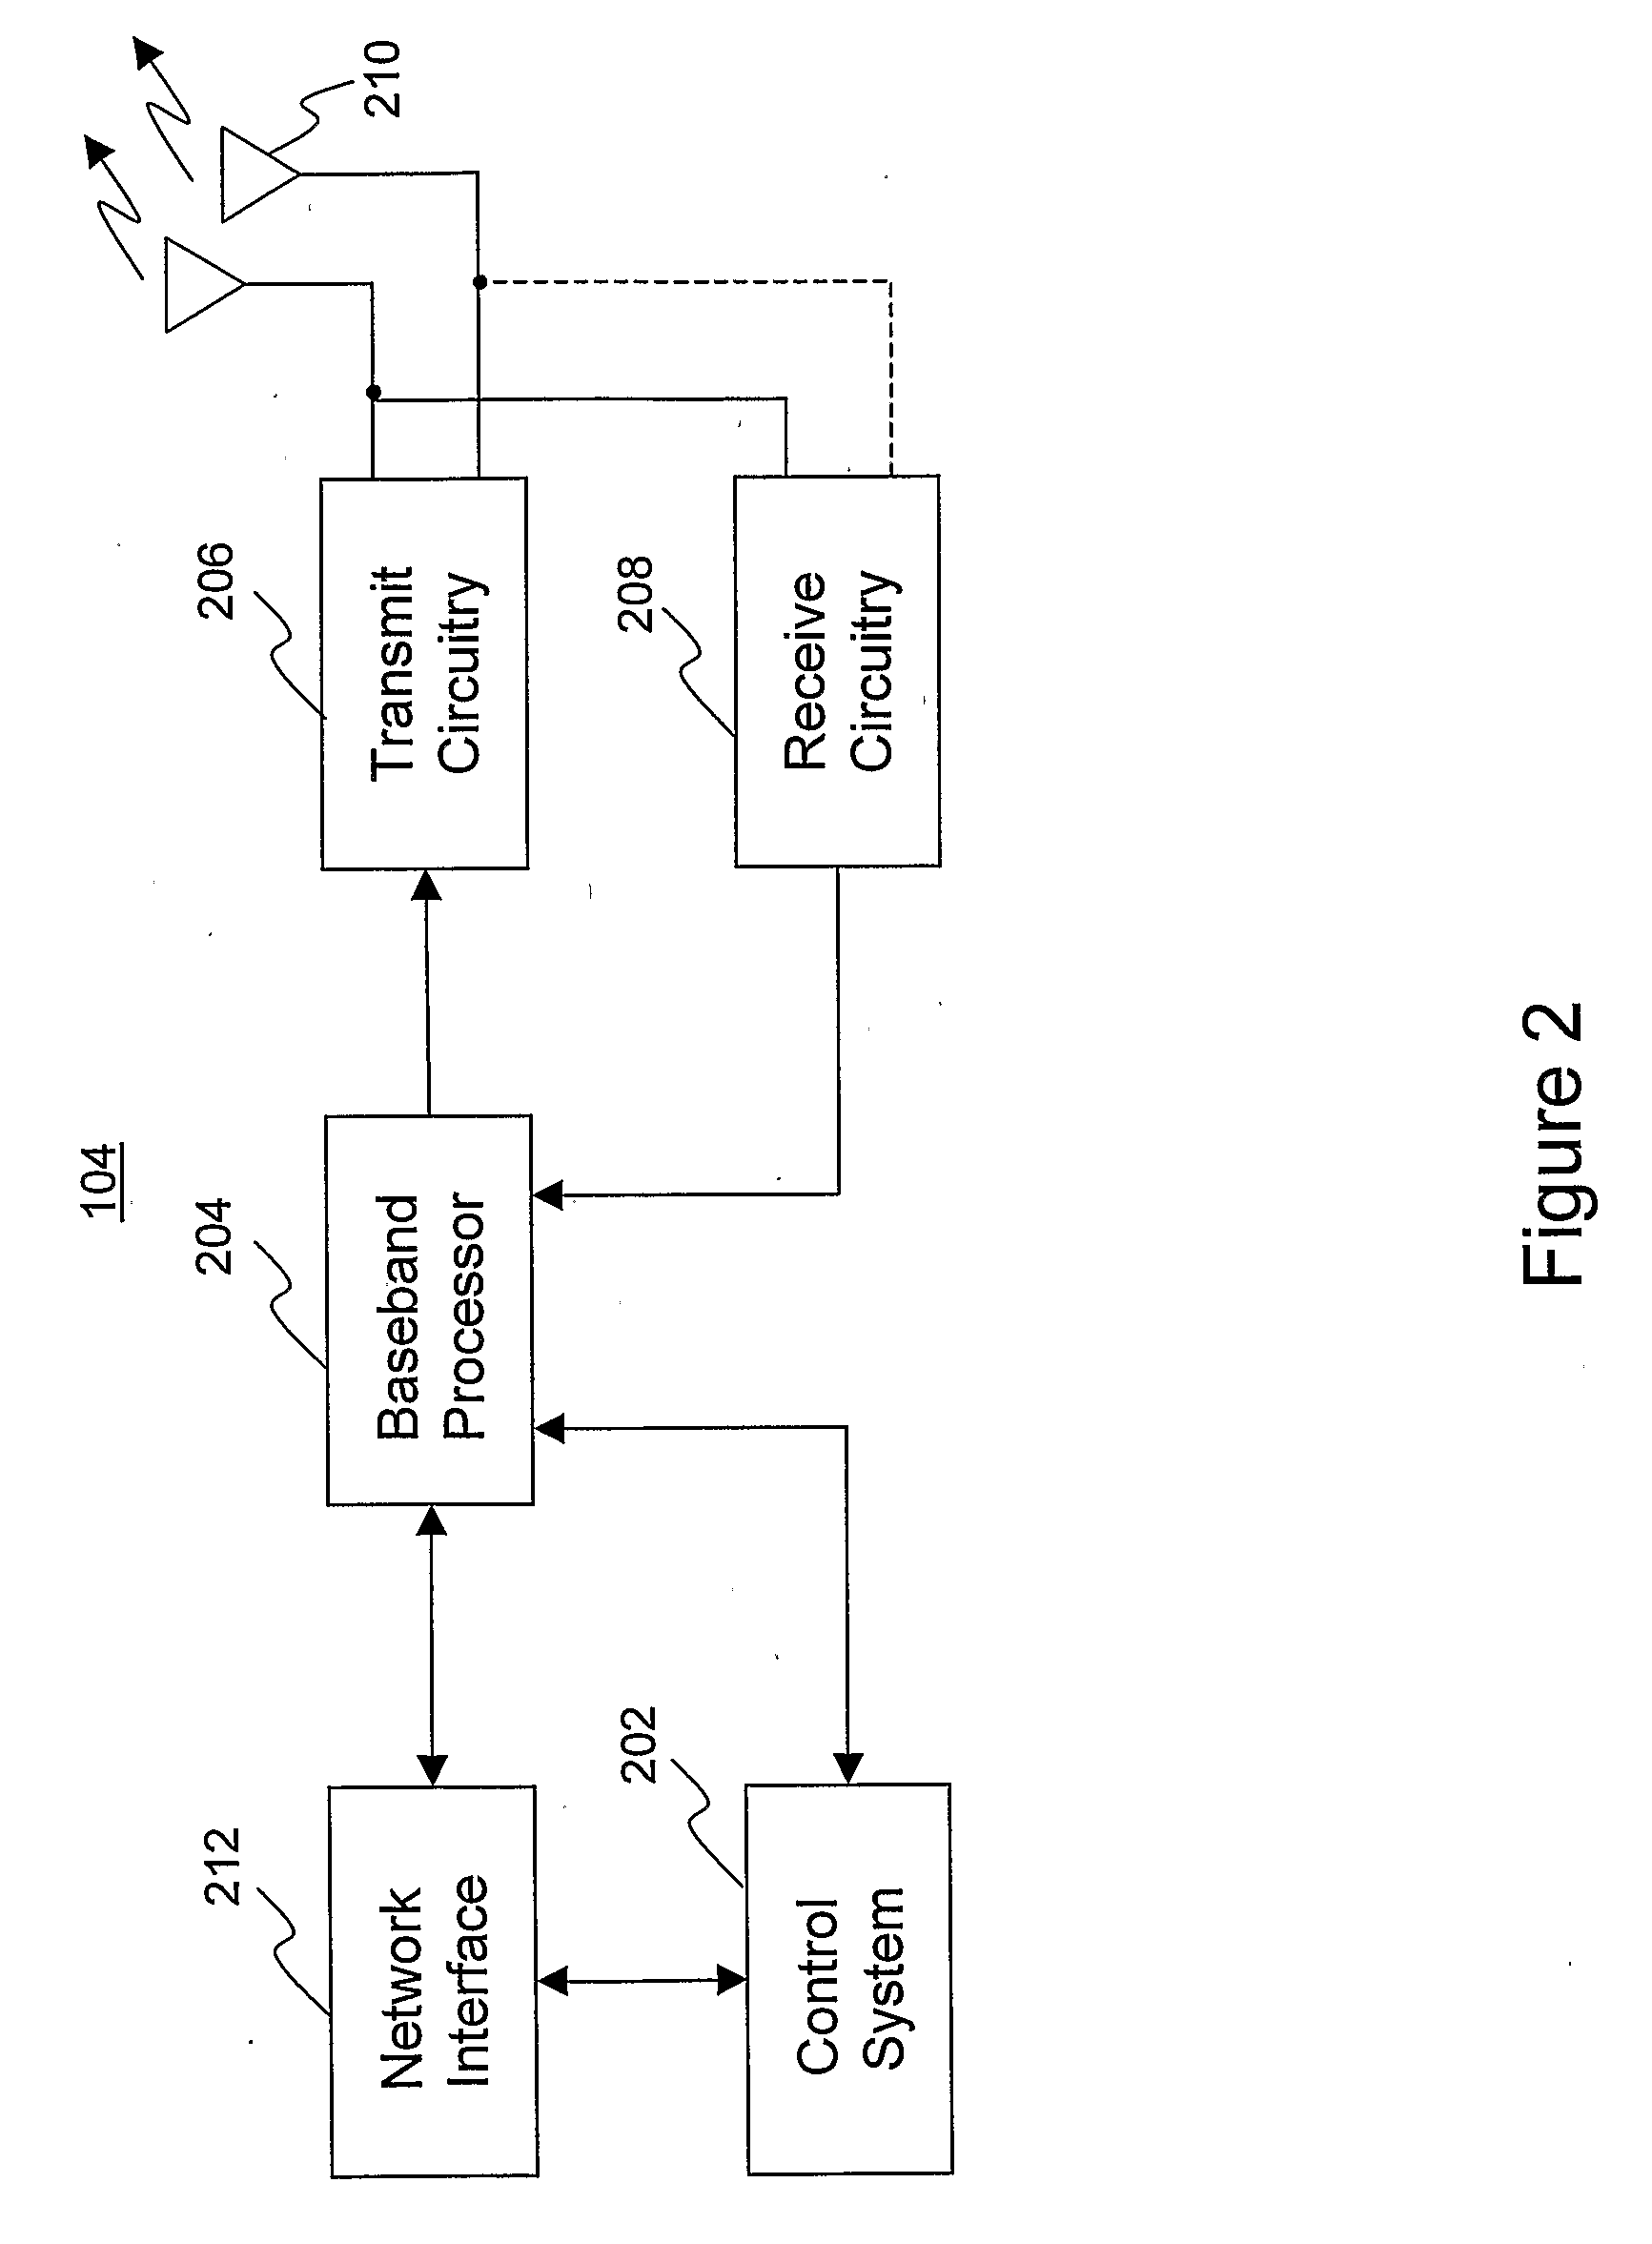 Channel Sounding in Ofdma System